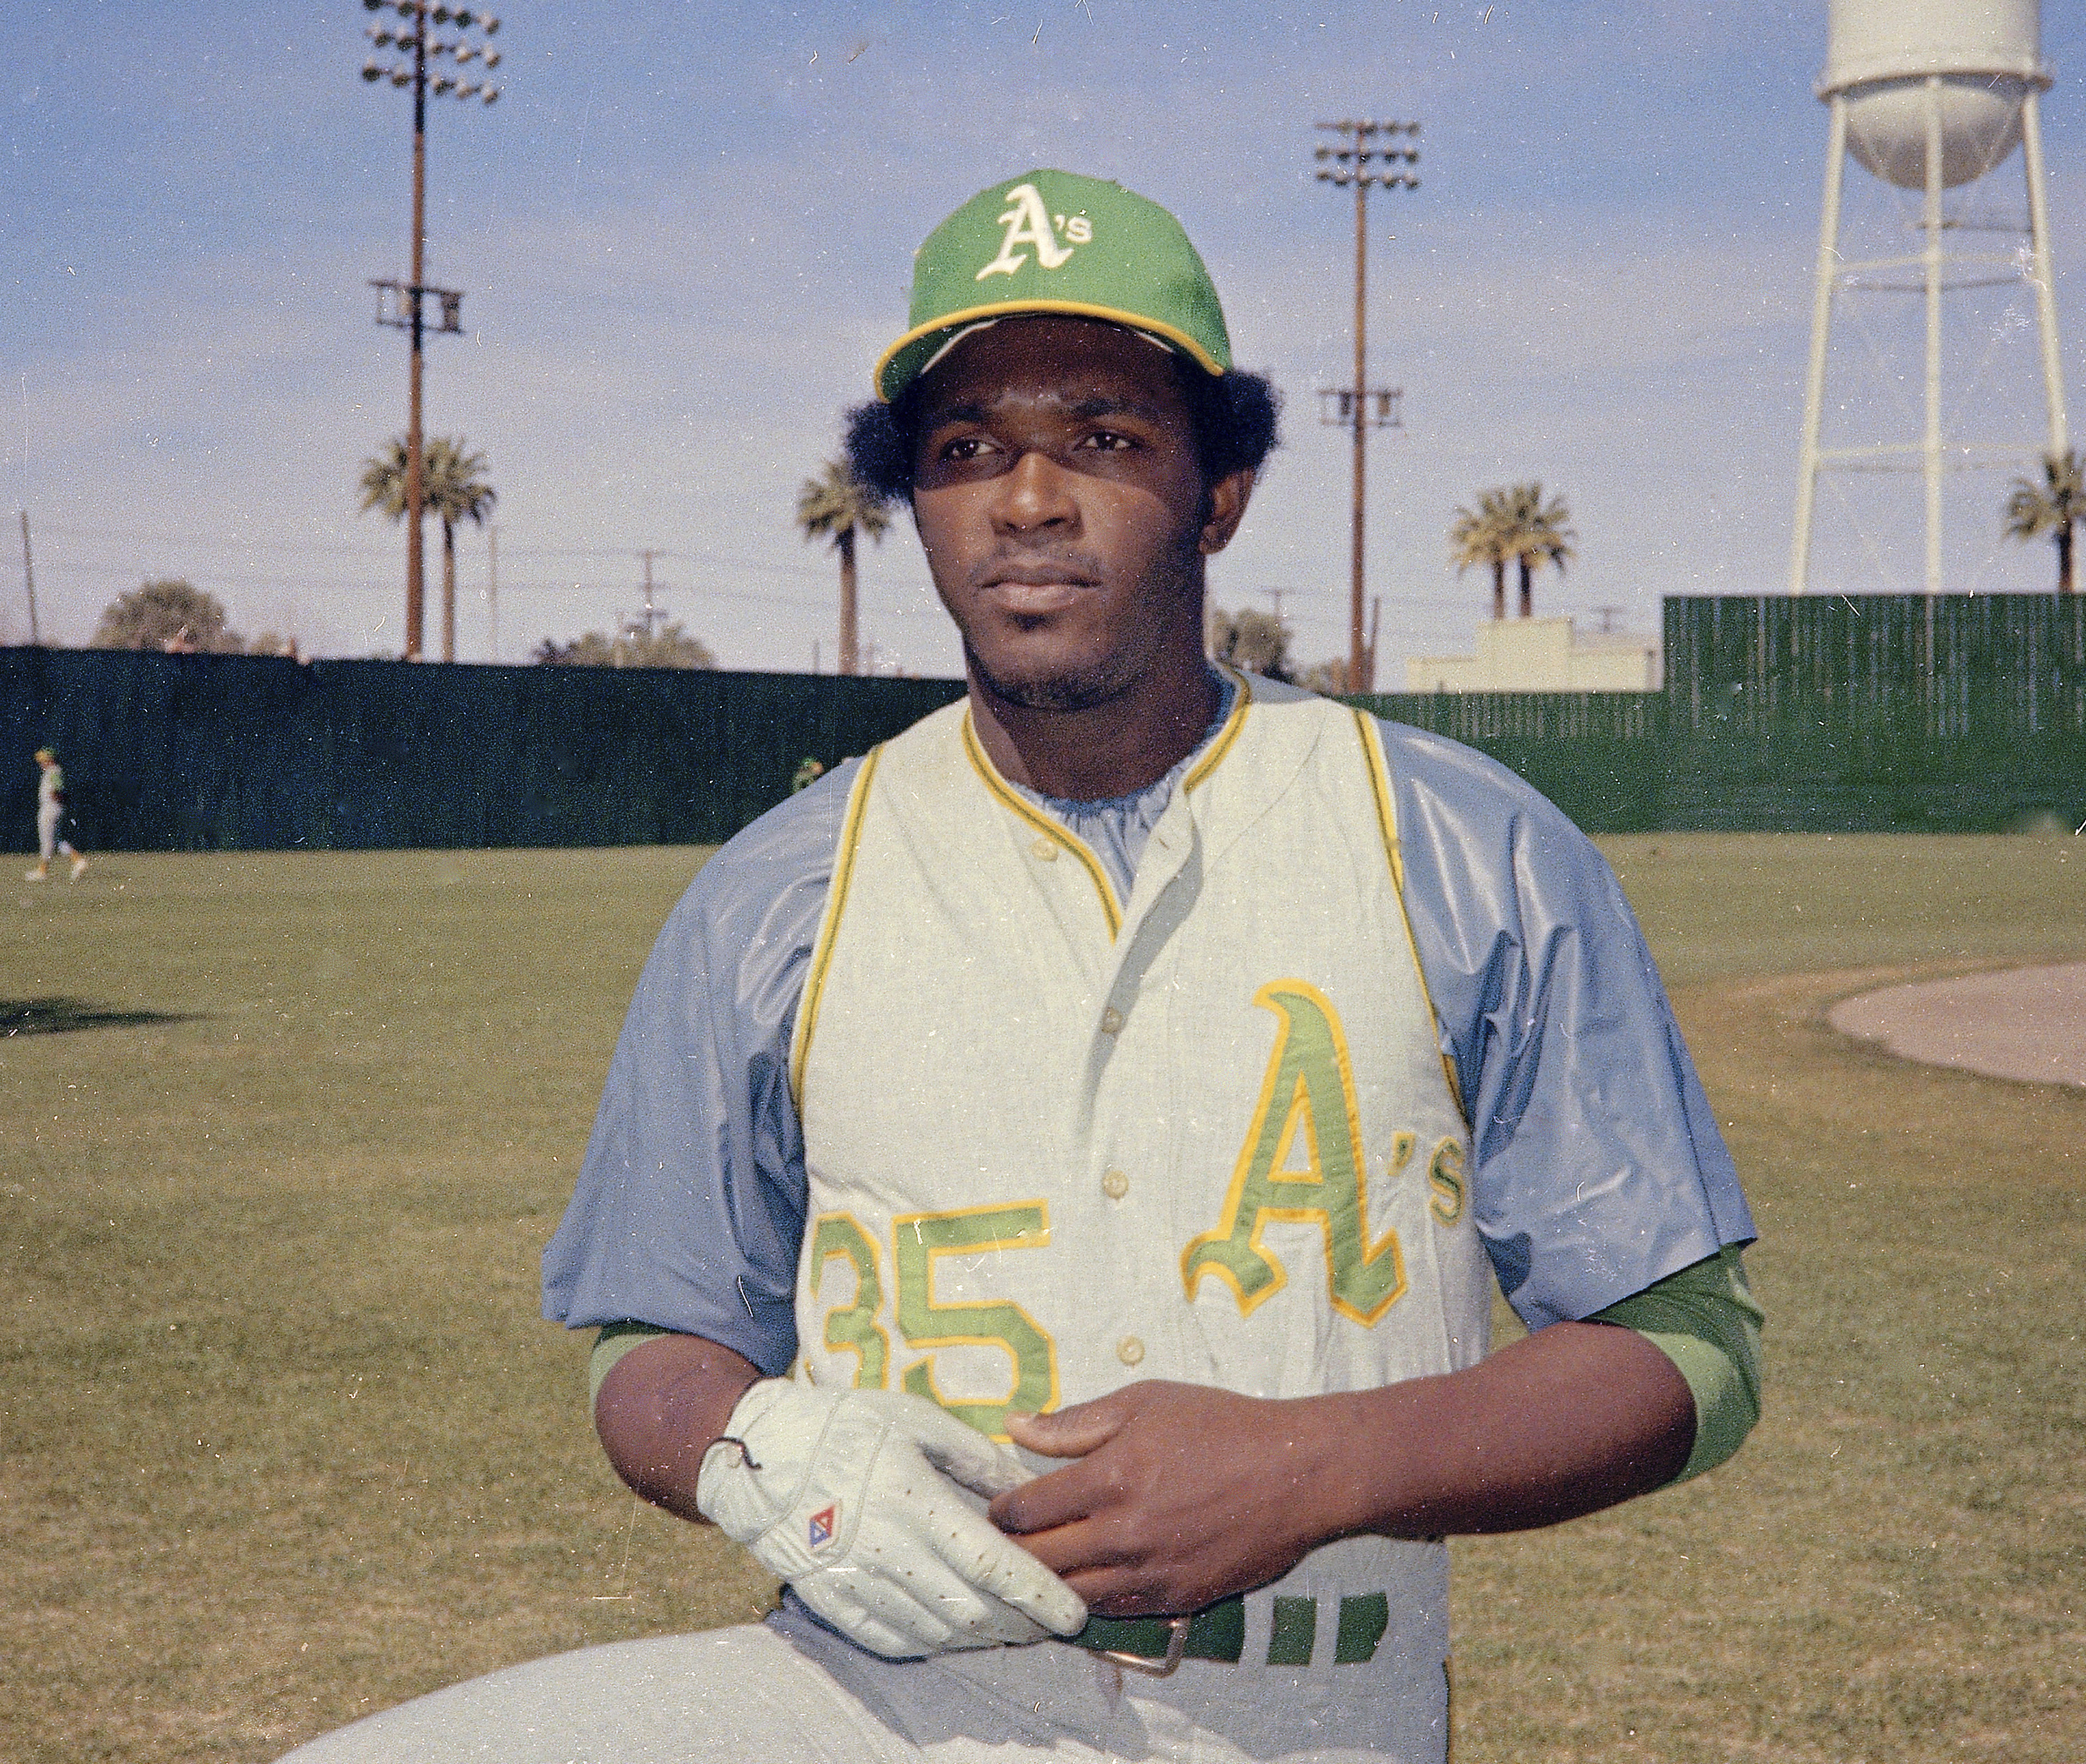 1972 Charles O. Finley Oakland A's World Series Championship